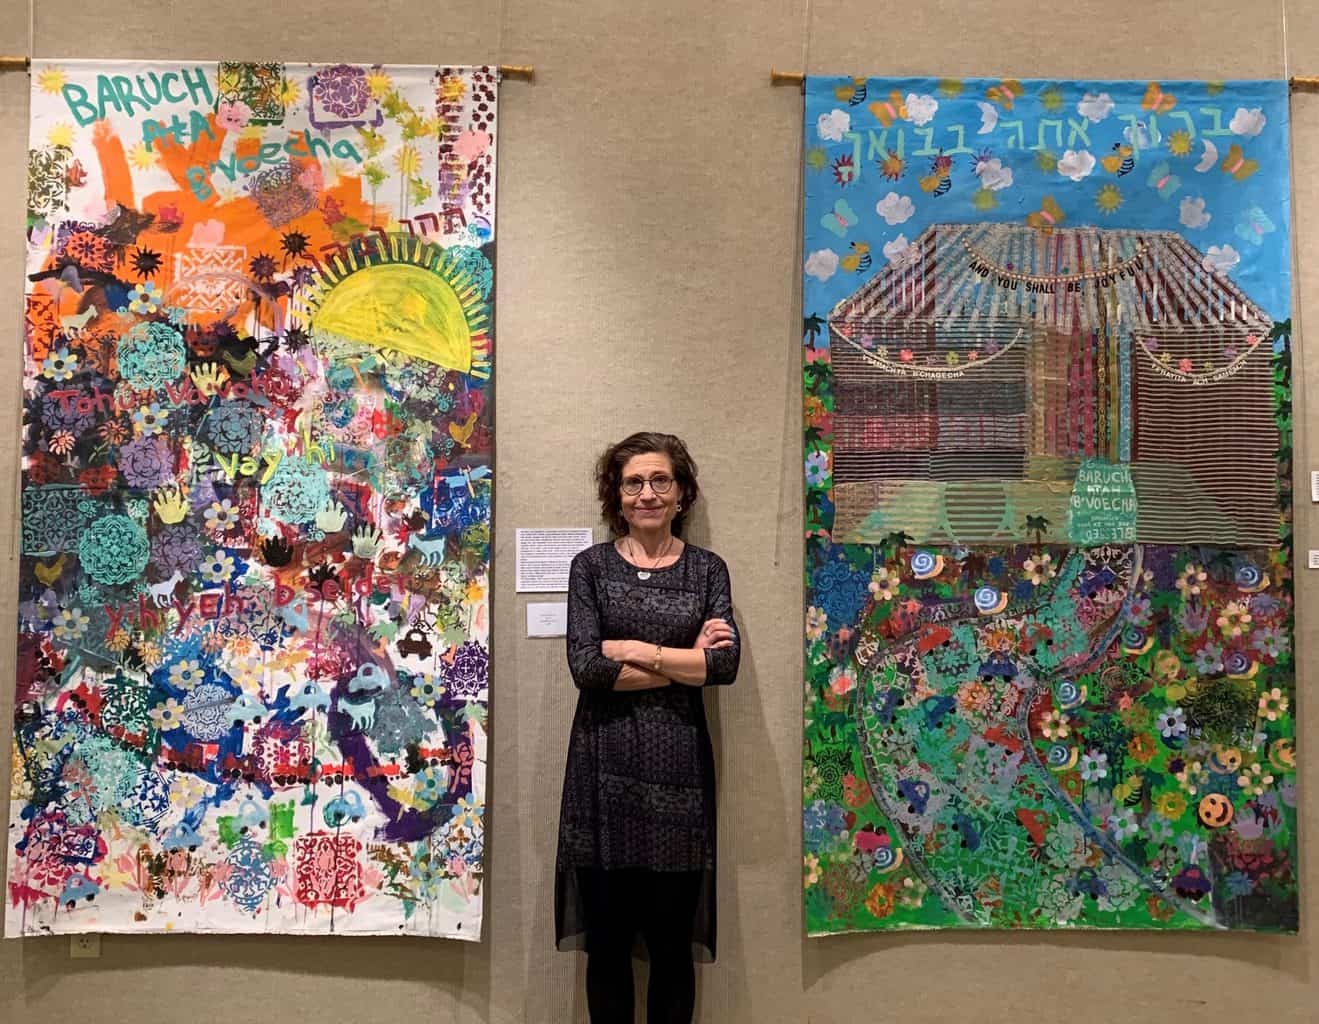 memphis-jewish-federation-and-memphis-jewish-community-center-to-host-lunch-and-learn-with-local-artist-carol-buchman